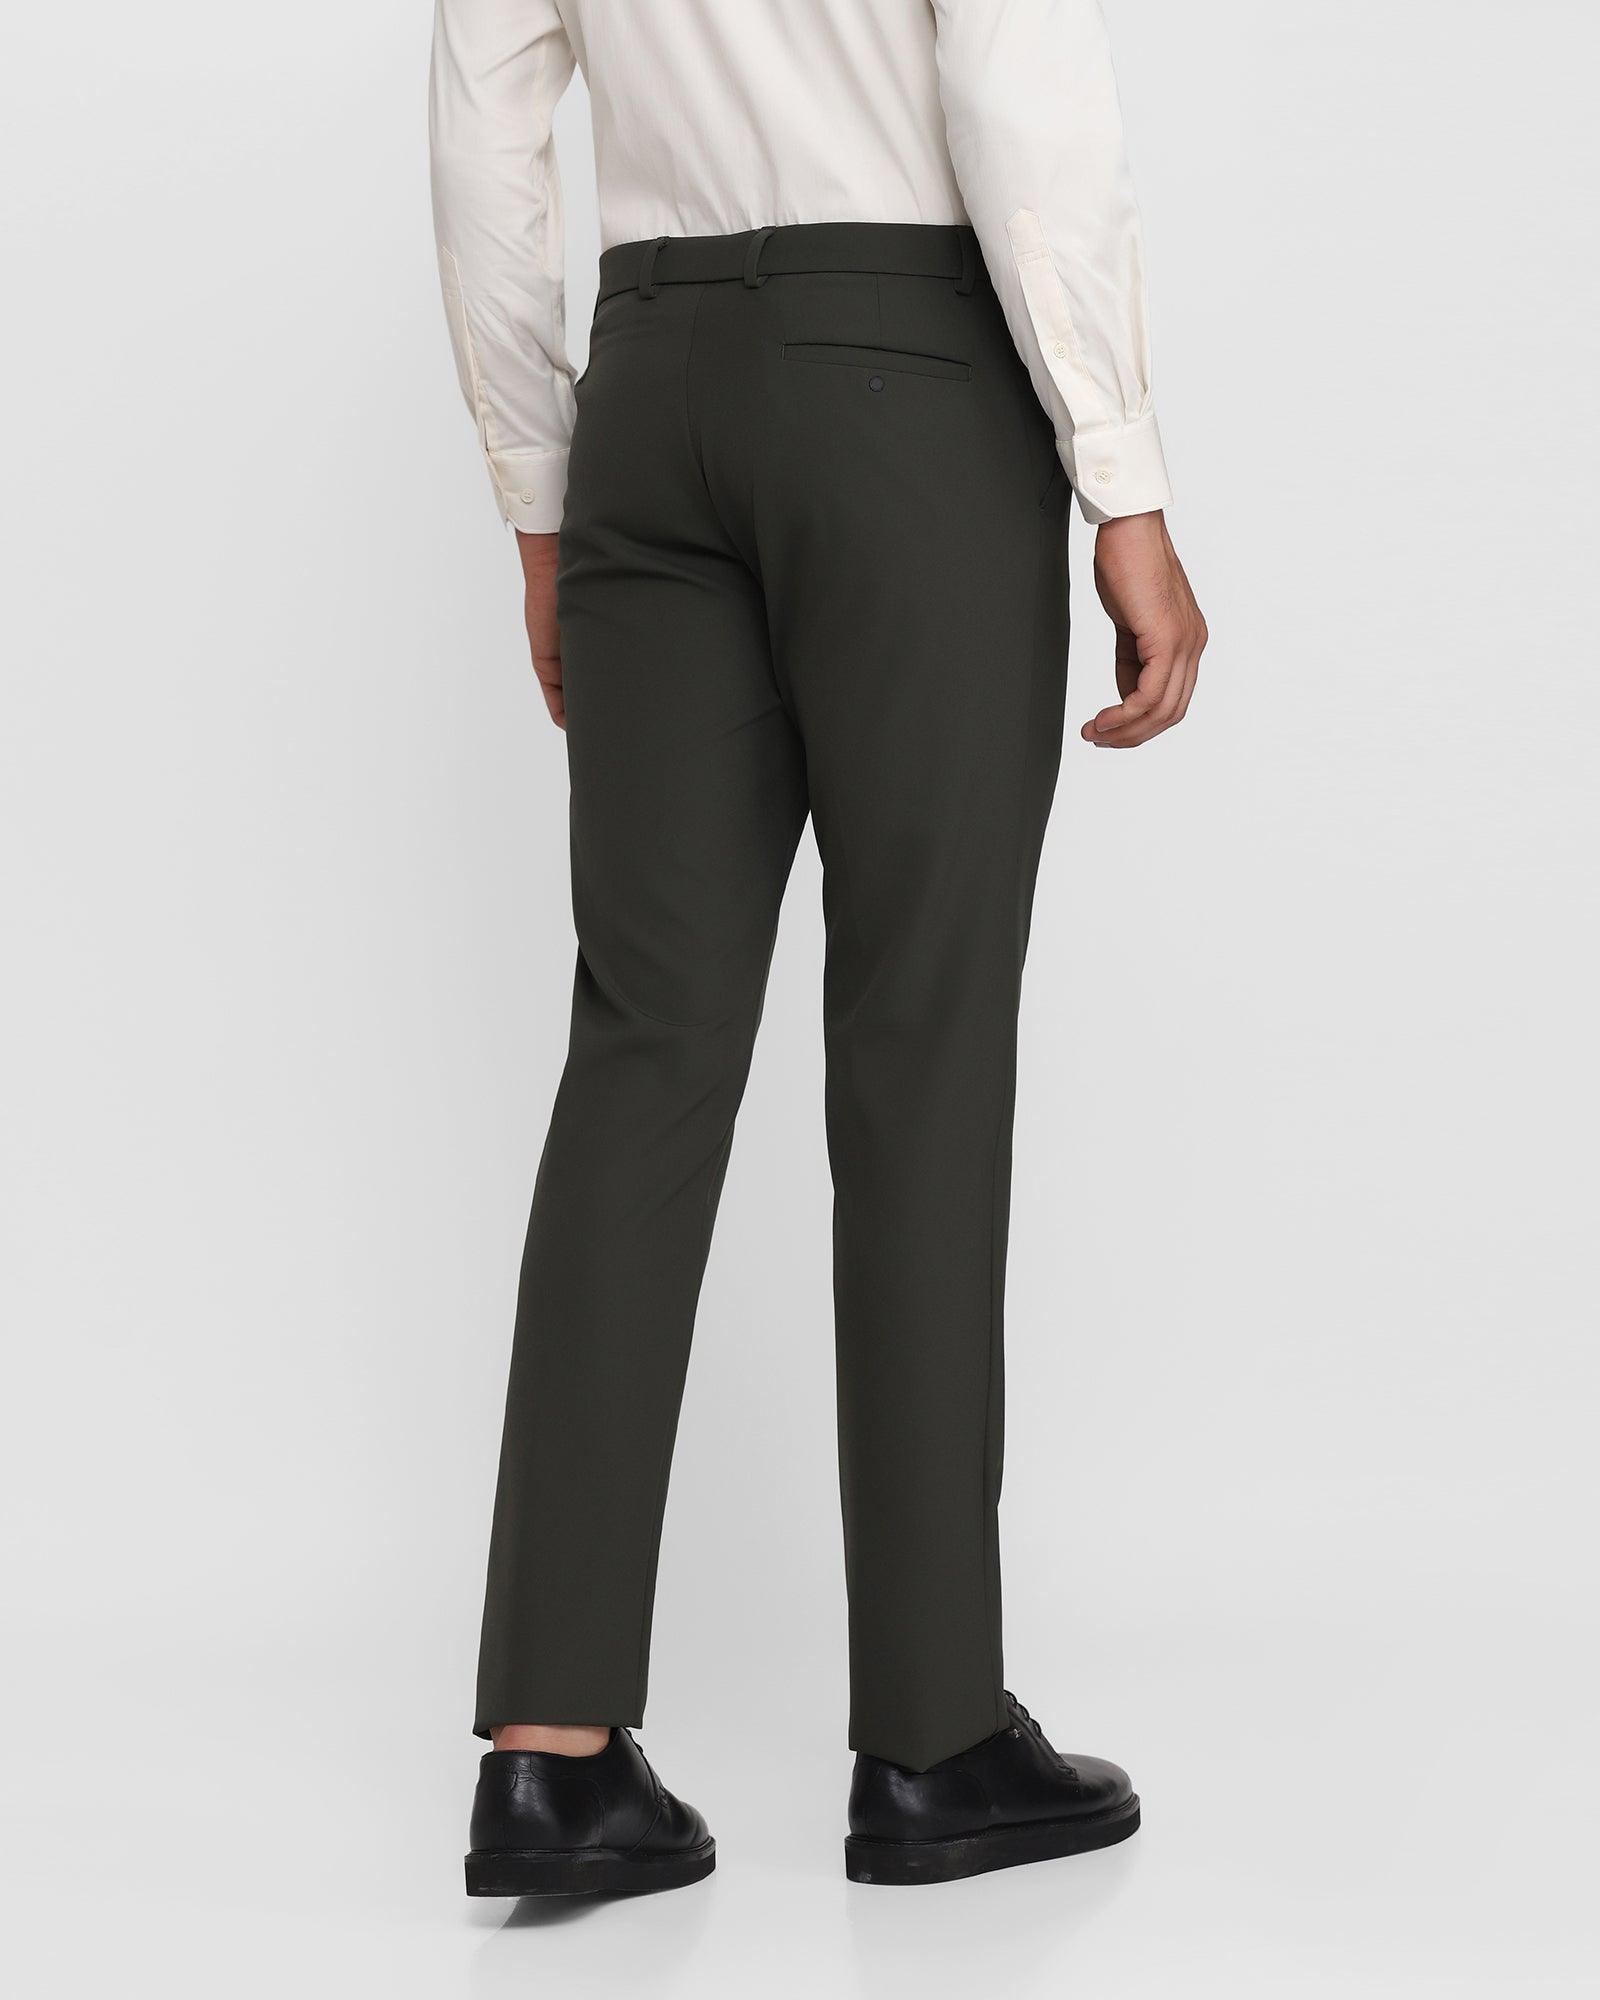 TechPro Slim Fit B-91 Formal Olive Solid Trouser - Ashley